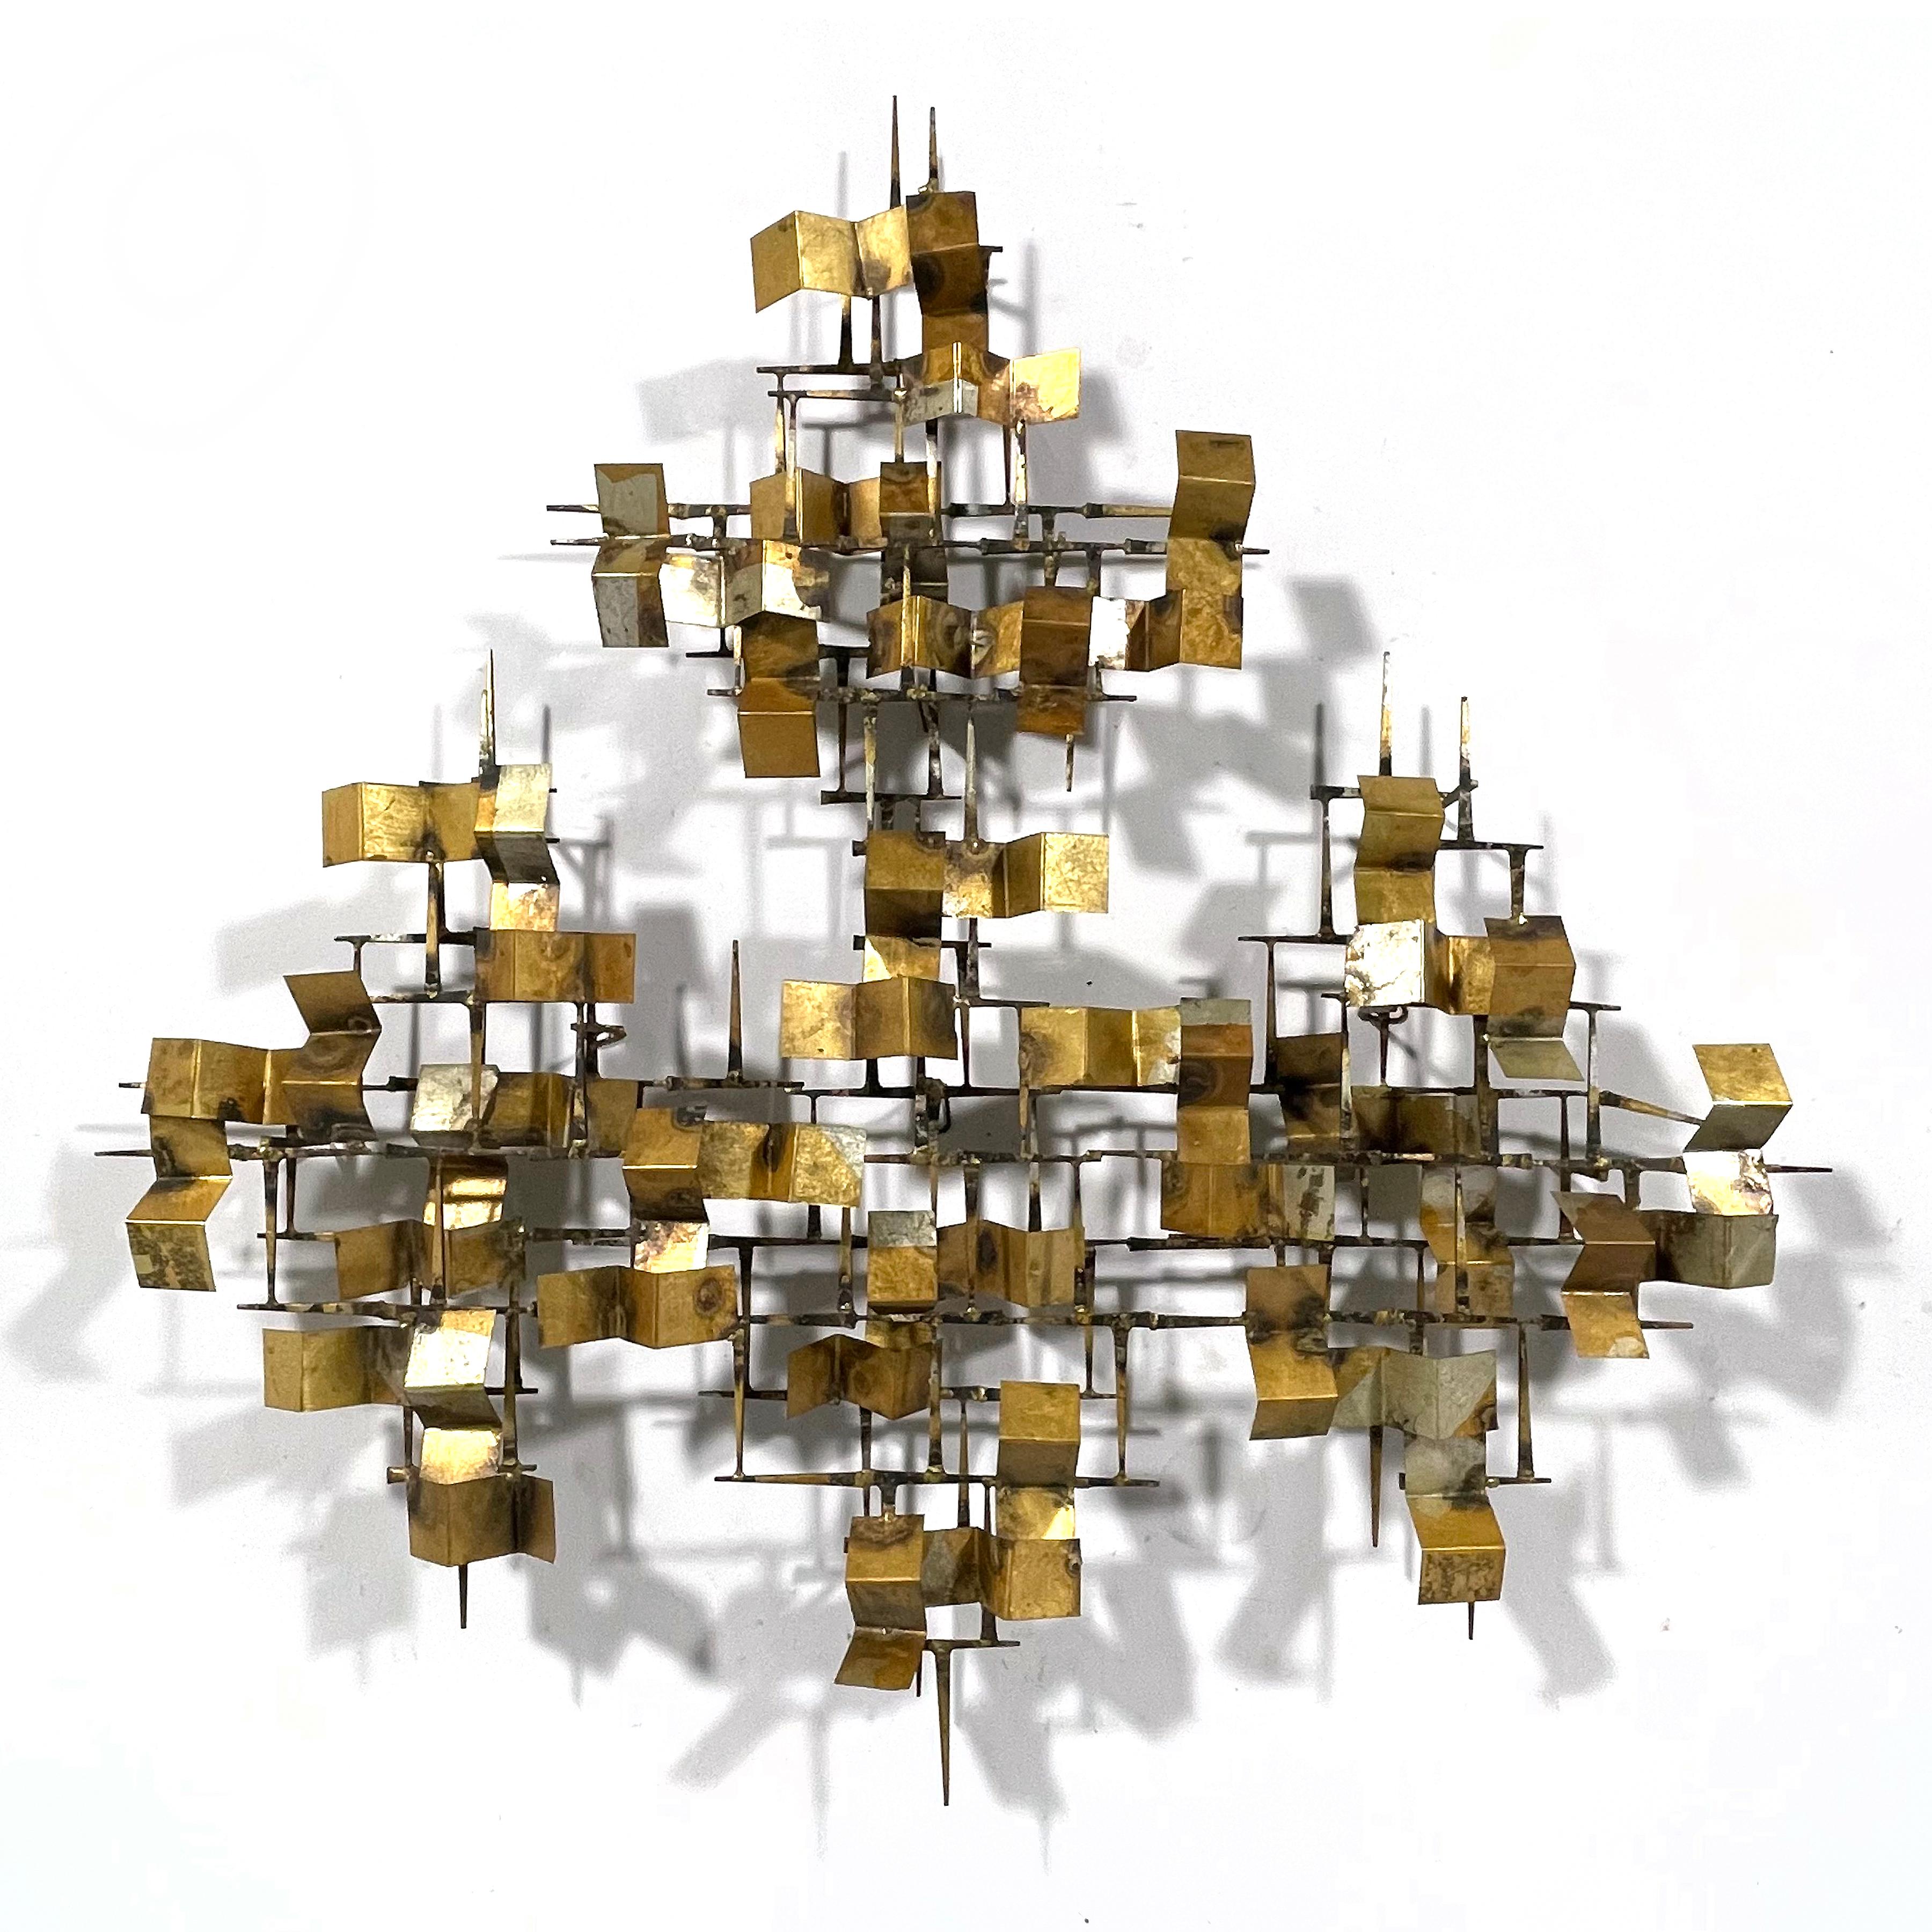 This dynamic abstract wall sculpture by William Bowie is a visual delight and activates any wall it is installed on. A composition of iron brick nails are welded with bronze and overlaid with a series of folded brass forms which have been partially